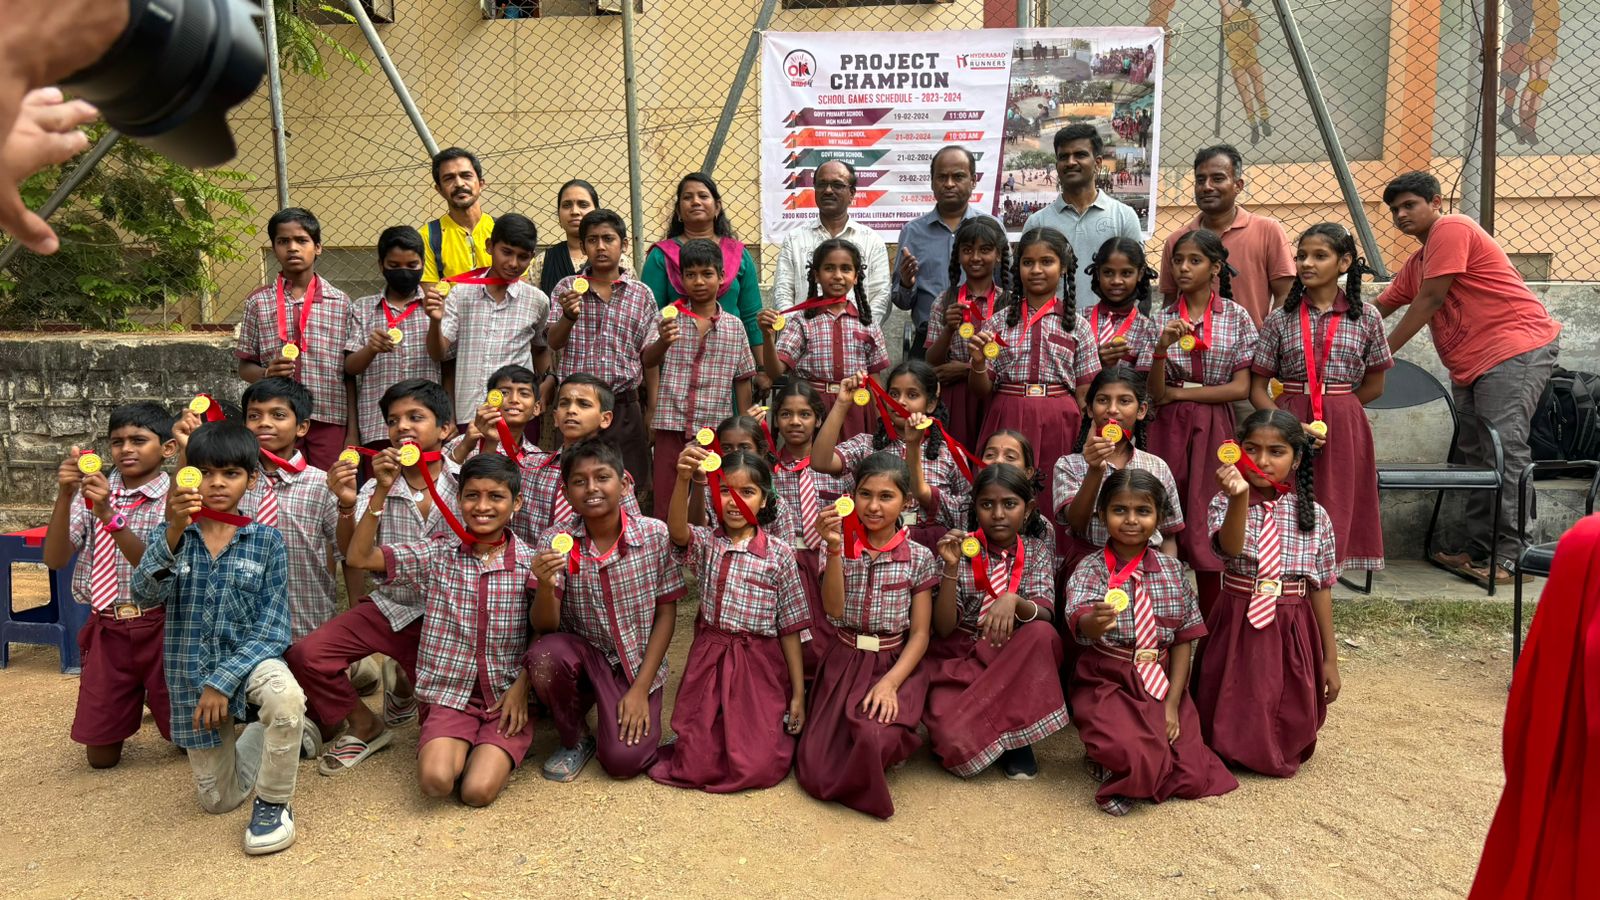 Project Champion Govt School Games held at 5 Govt Schools where there was no Physical Training Teacher was available but kids were trained in sports and games condctd-5